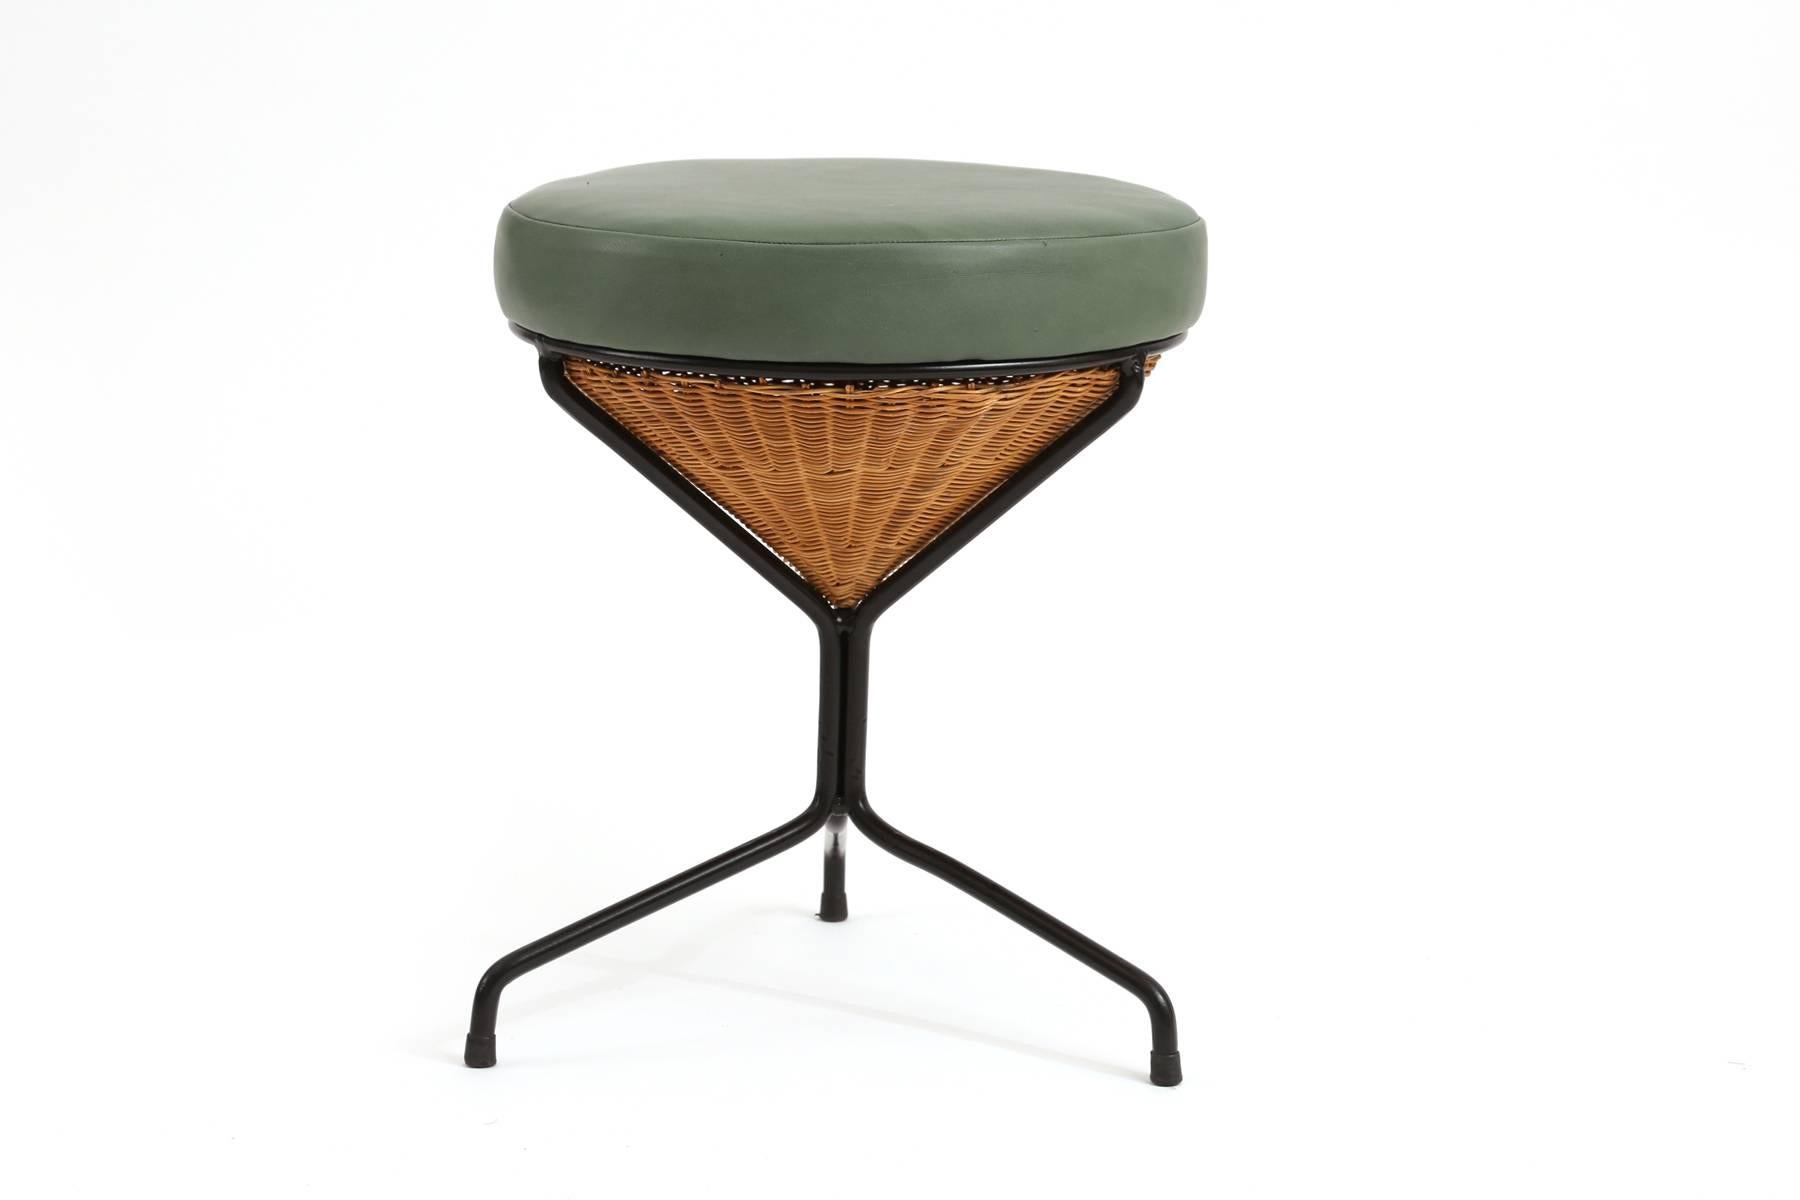 Danny Ho Fong for Tropi-Cal stools circa late 1950s. These examples have recently powder coated tripod iron legs with inset woven wicker forms and newly upholstered green leather seats. Price listed is for the pair.